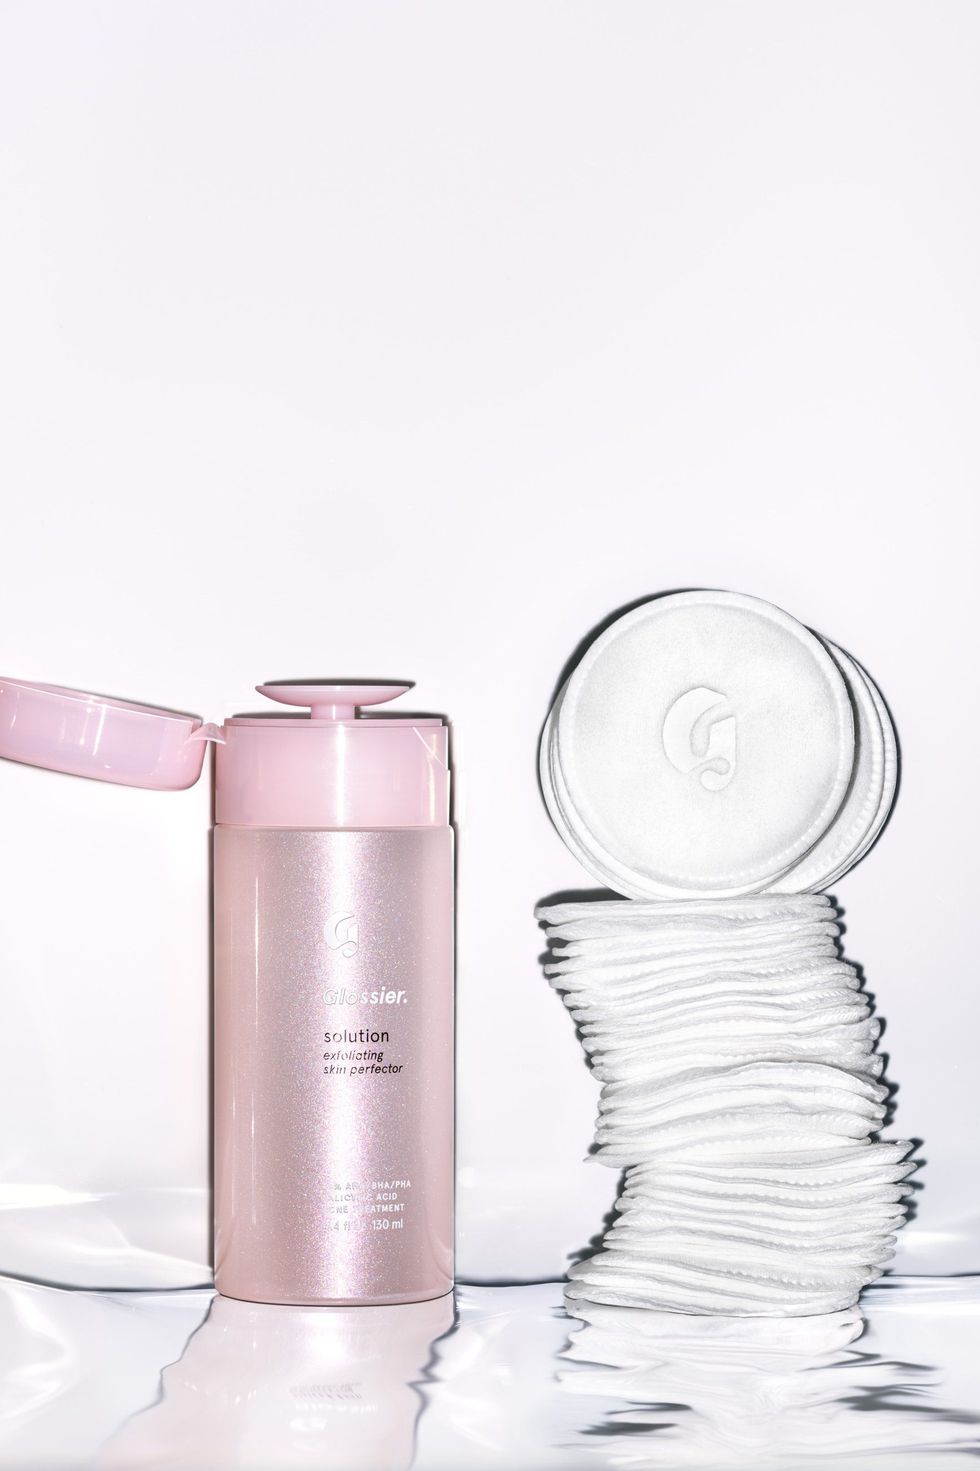 Beauty Review Blog on X: Looking for a Glossier Promo Code? Shop my  favorites and automatically save 20% on your first order!   #beauty #skincare #bblogger #promocode #coupon   / X